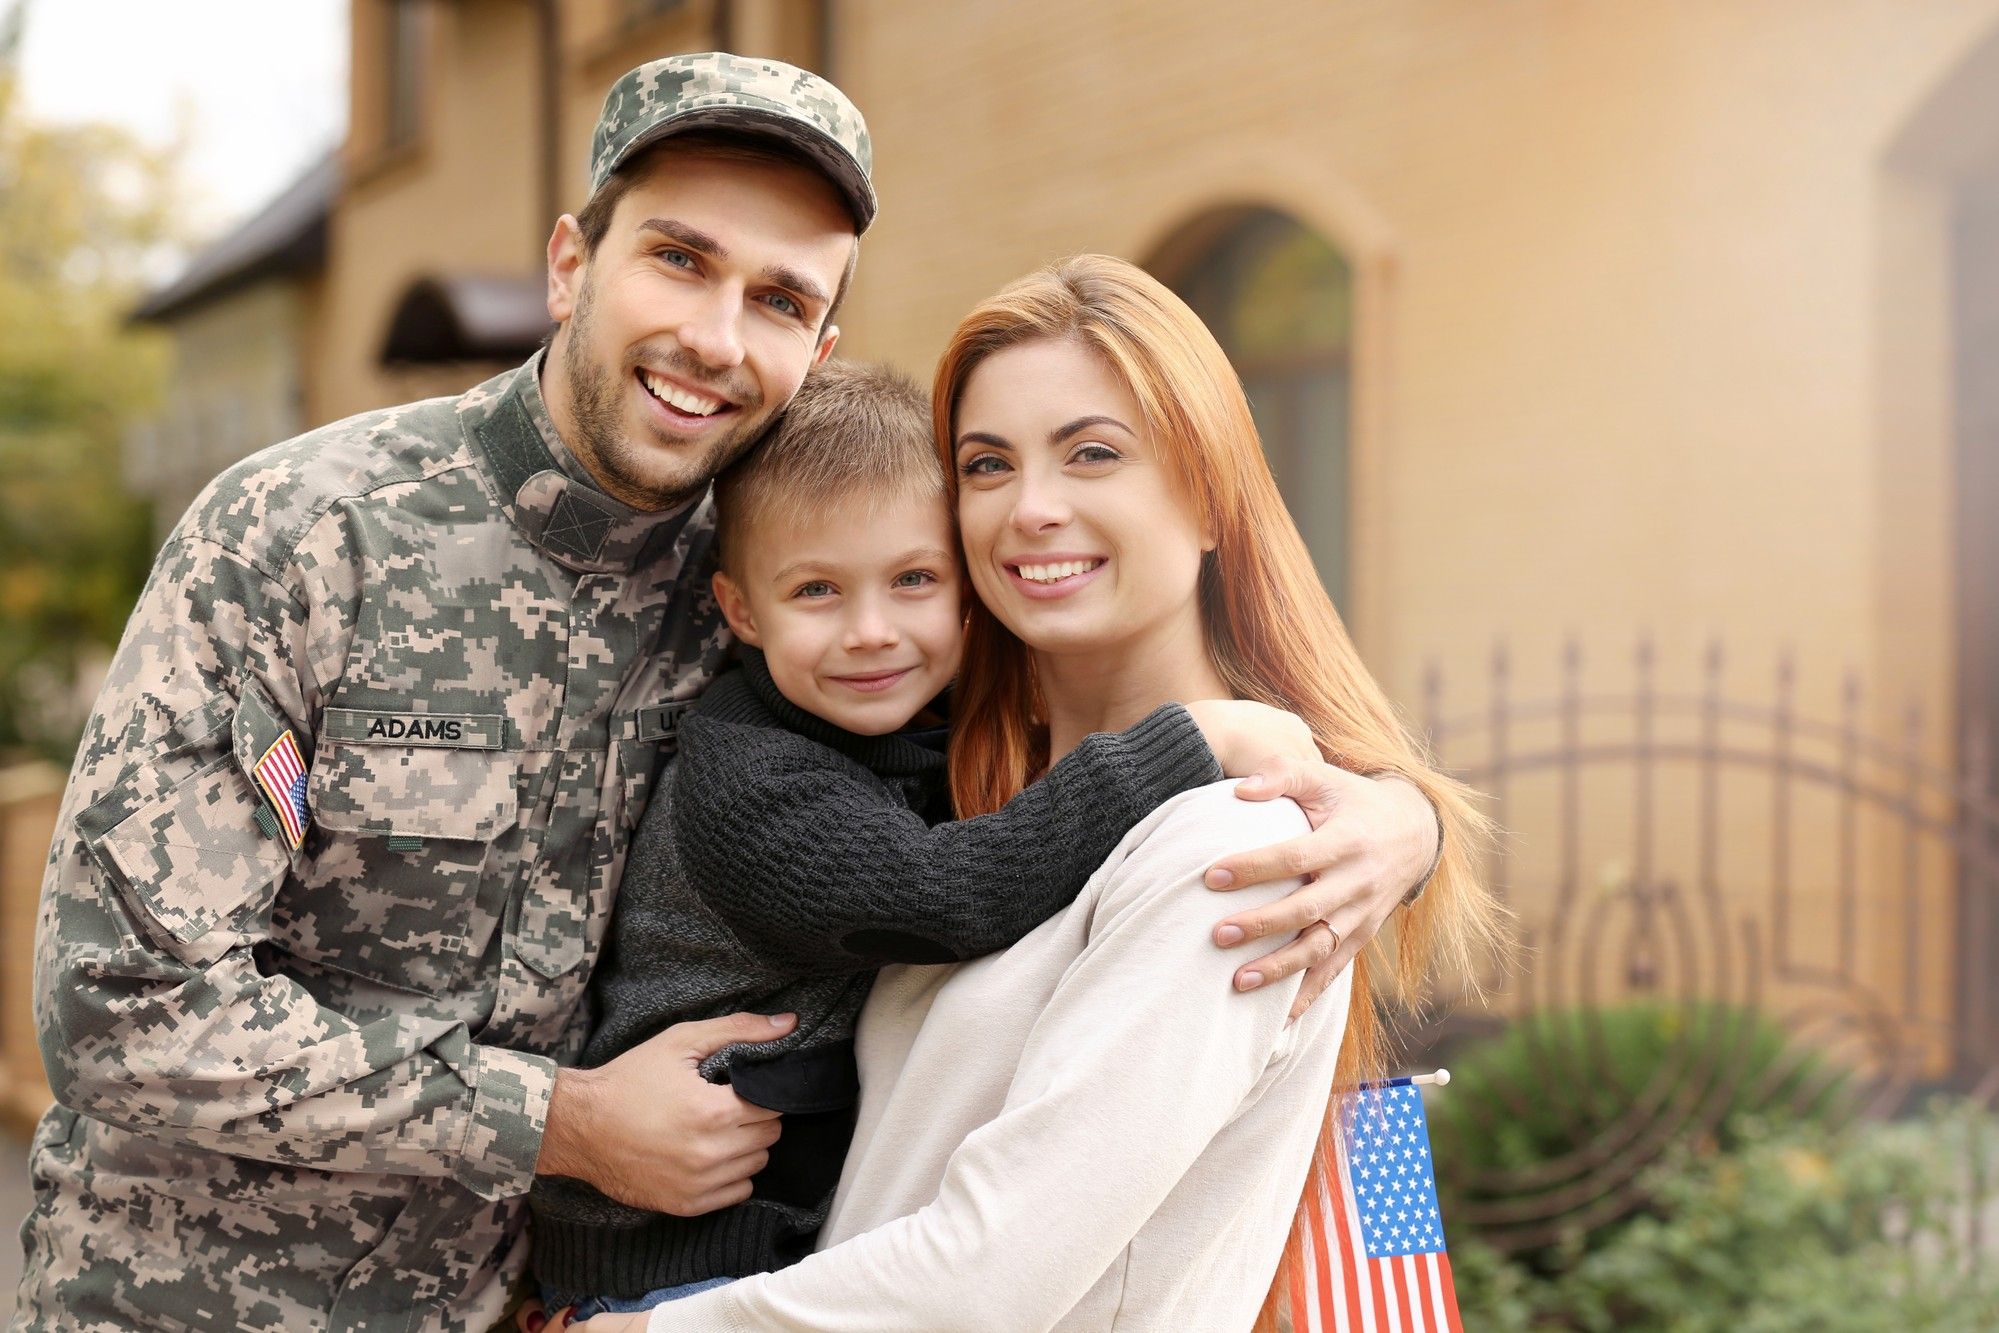 SCRA benefits are in place to protect military service members.